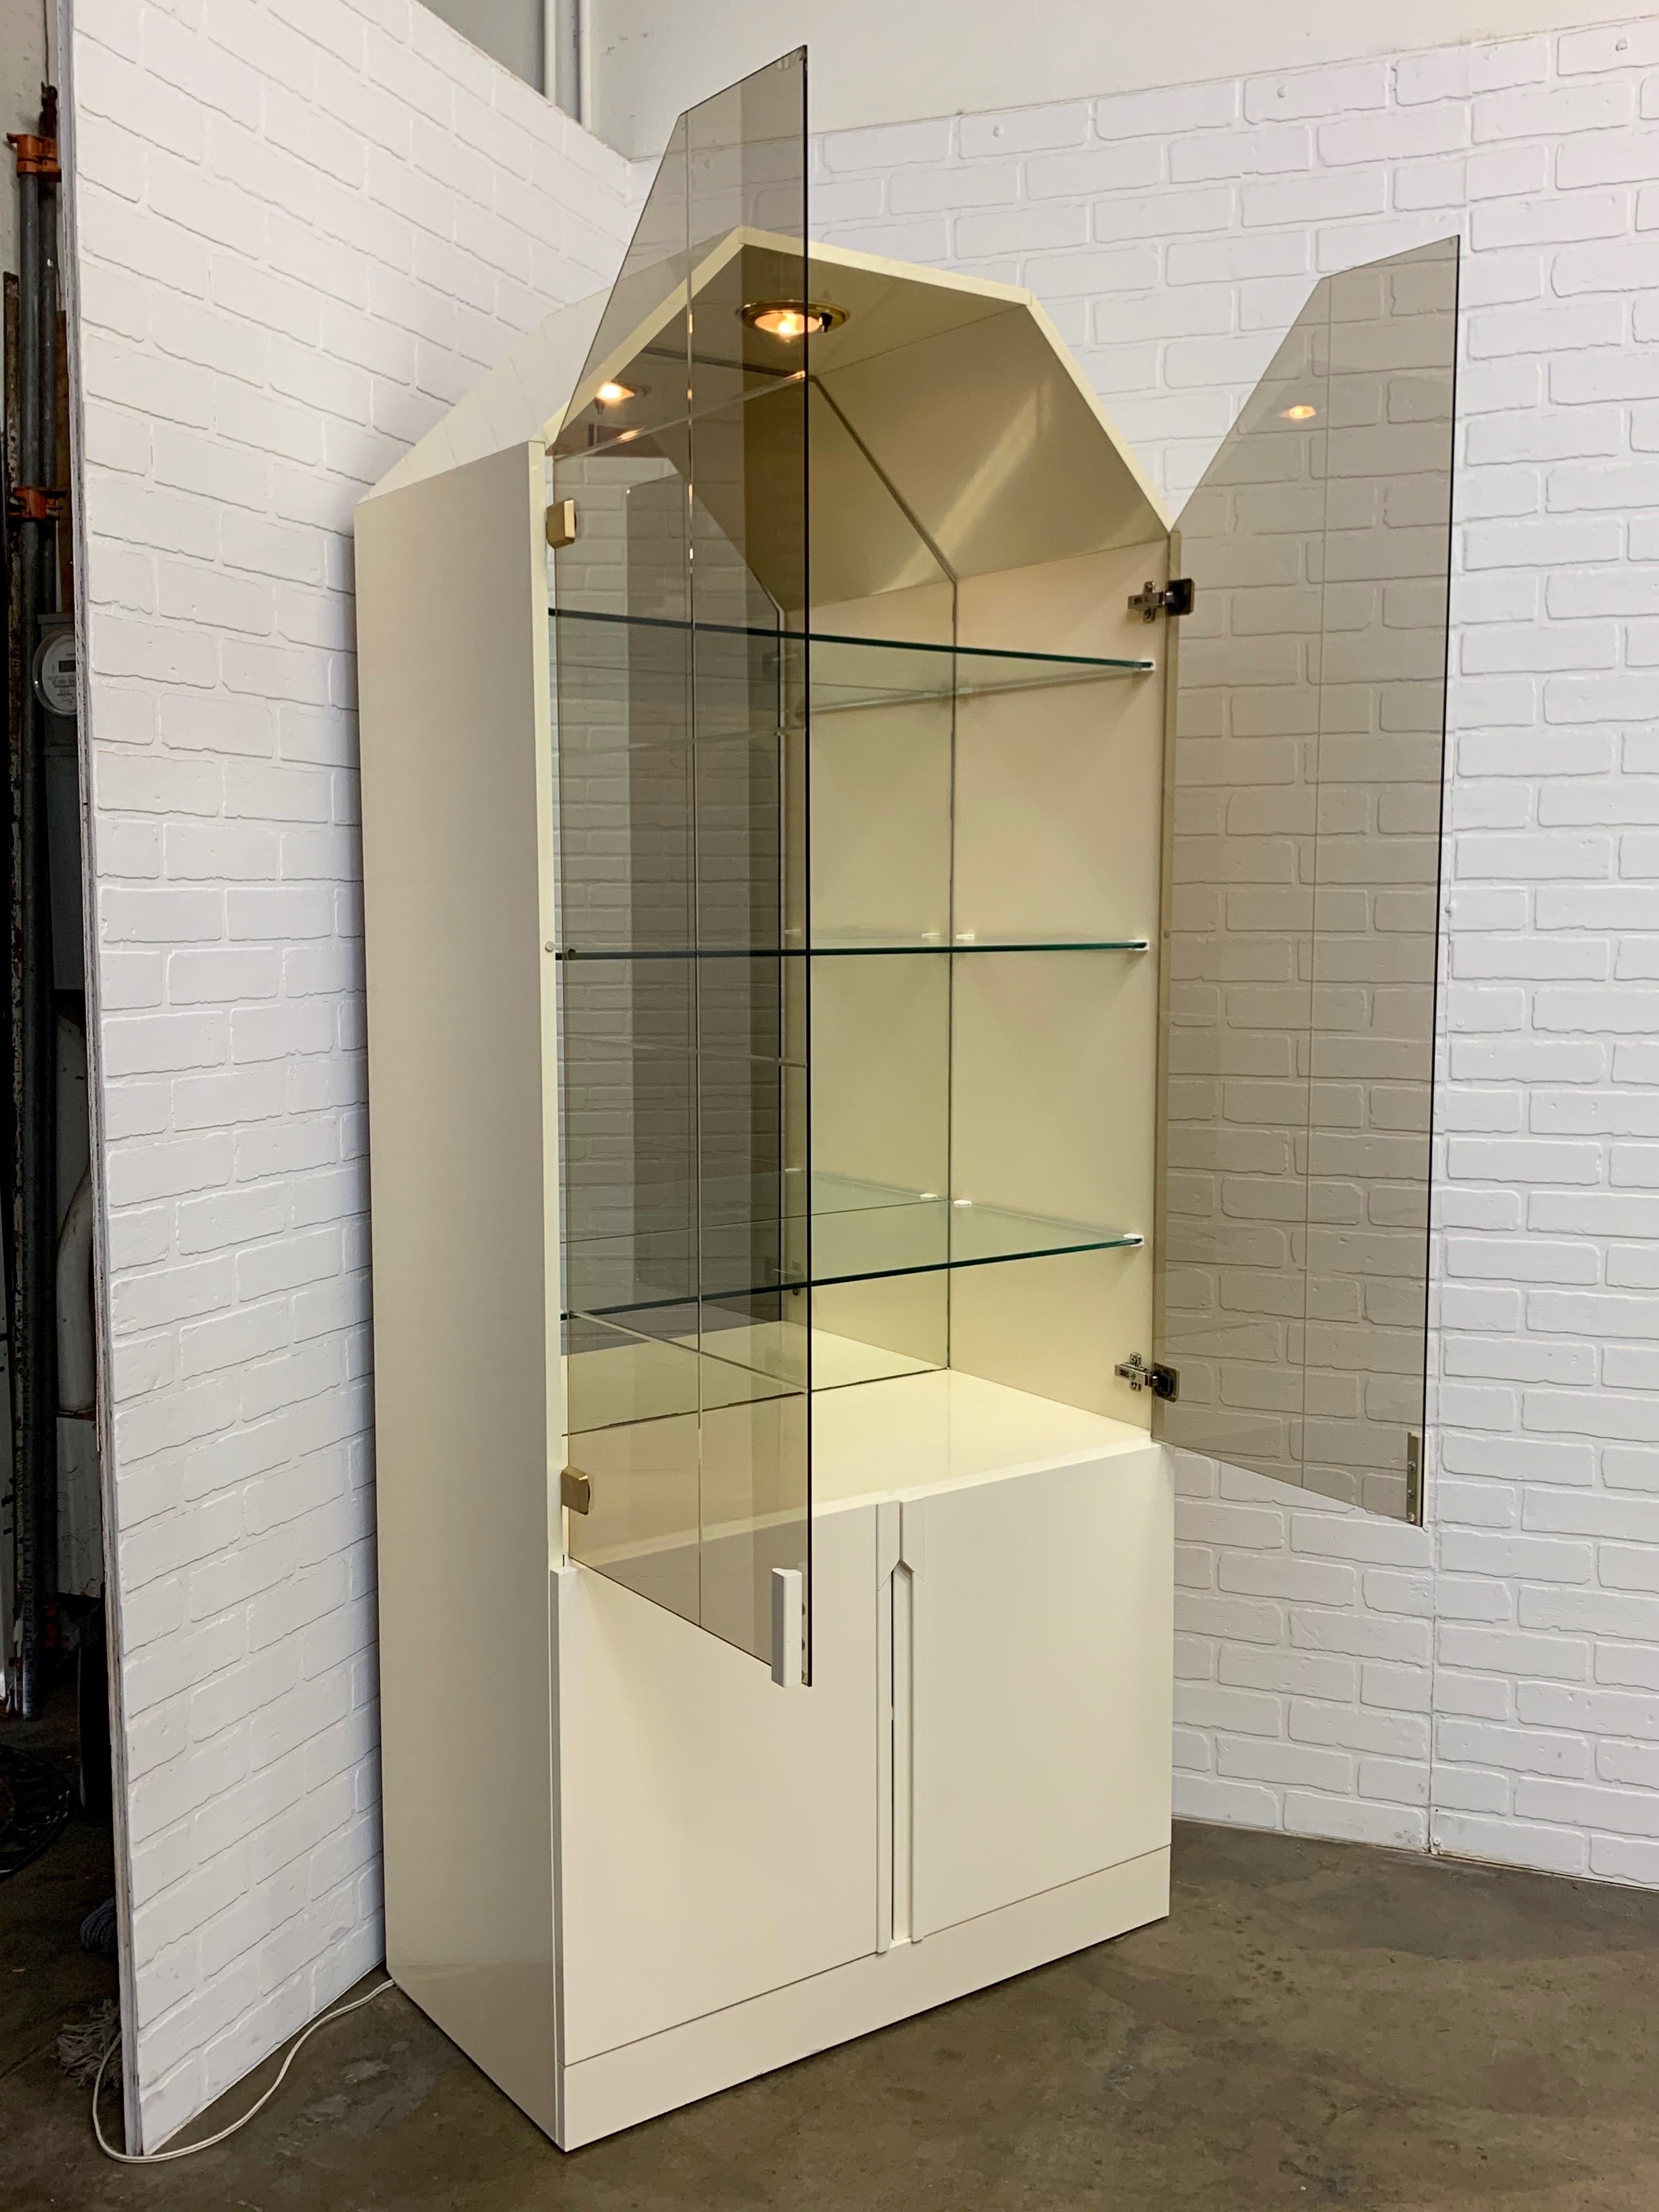 White lacquer Postmodern vitrine with bronze smoked faceted glass and beveled mullions on the glass doors 
with storage down below. Can be used for china, glassware or collections.